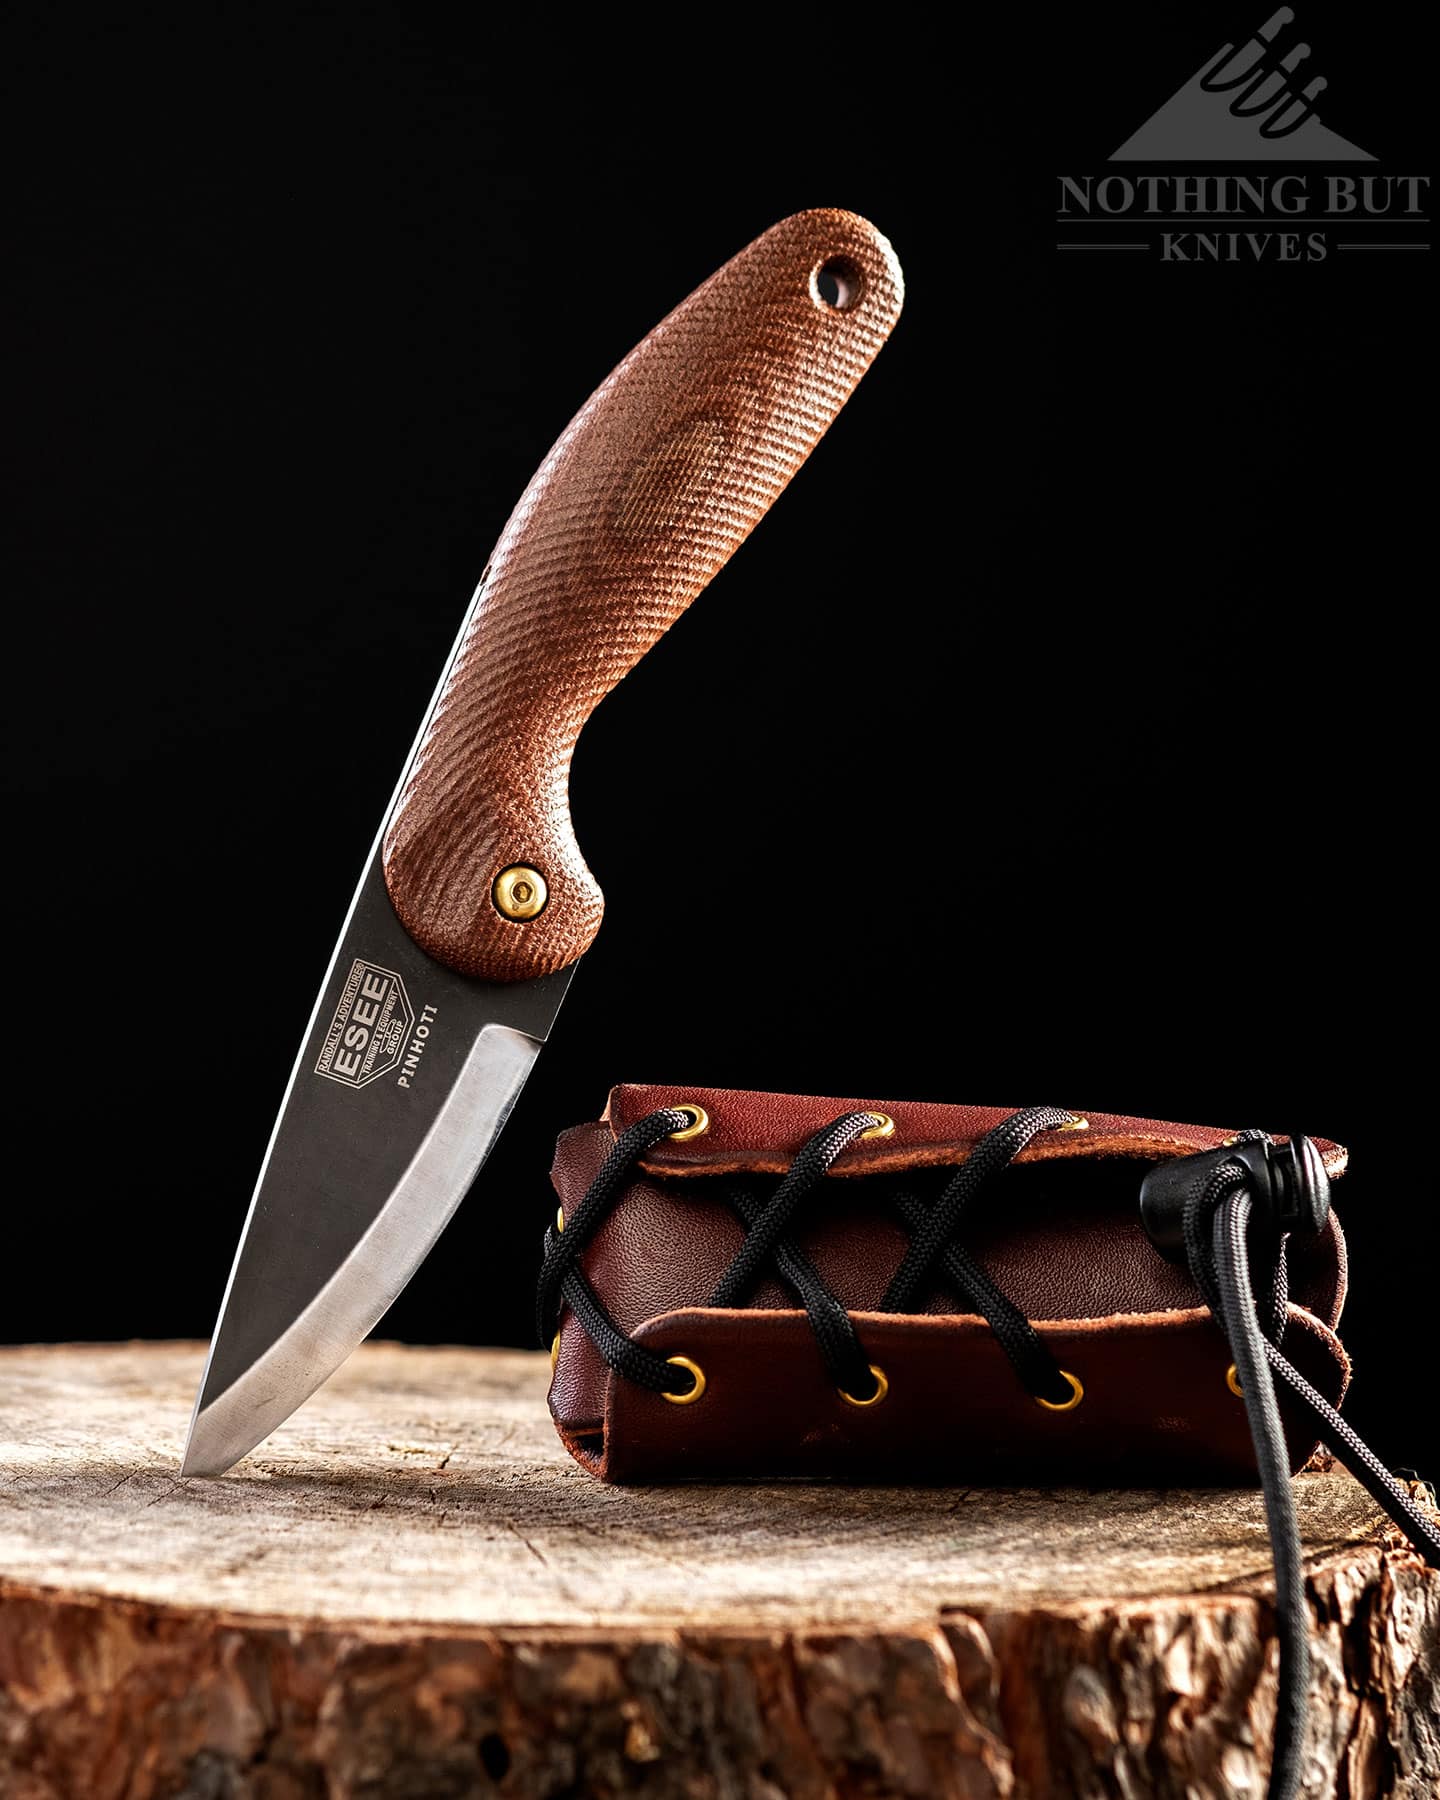 The Esee Pinhoti is a unique friction folder capable of bushcraft knife tasks. 